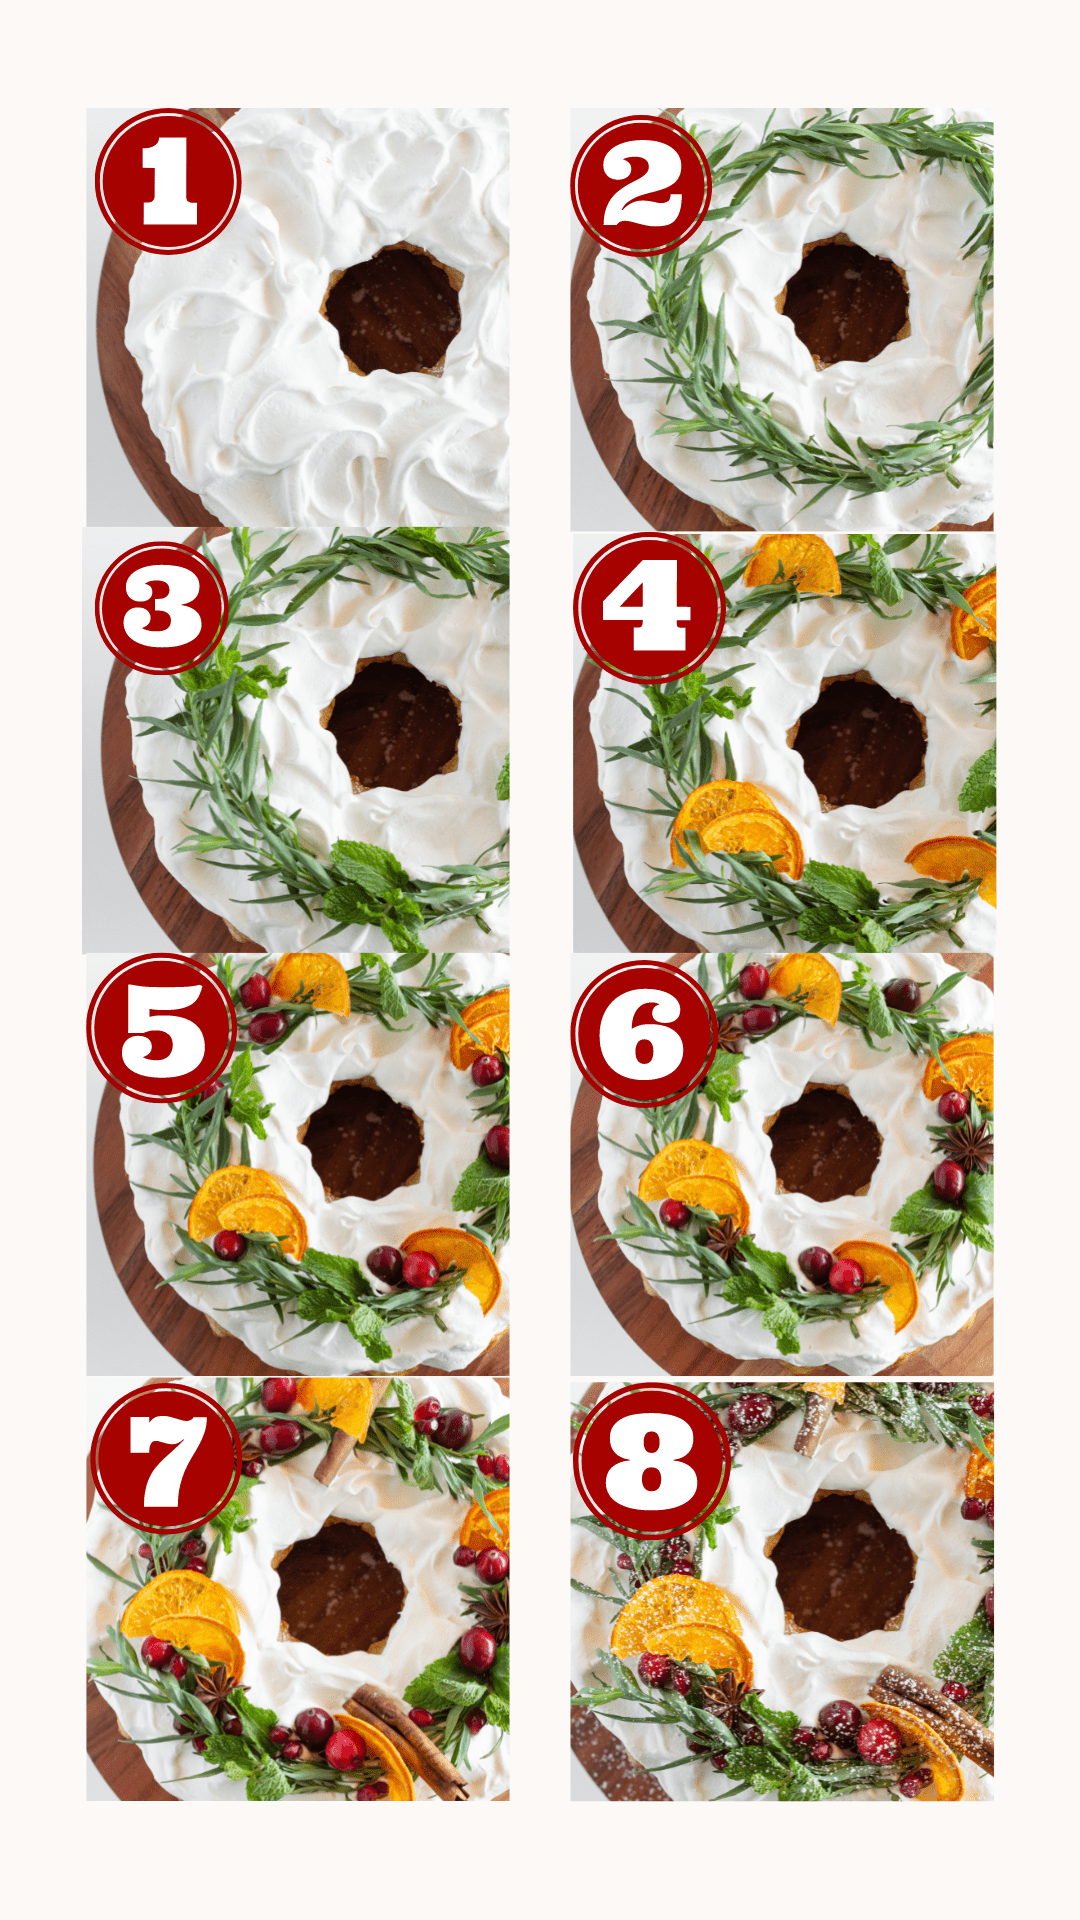 8 step by step photos showing you how to assemble a Bundt Cake Christmas Wreath easily.